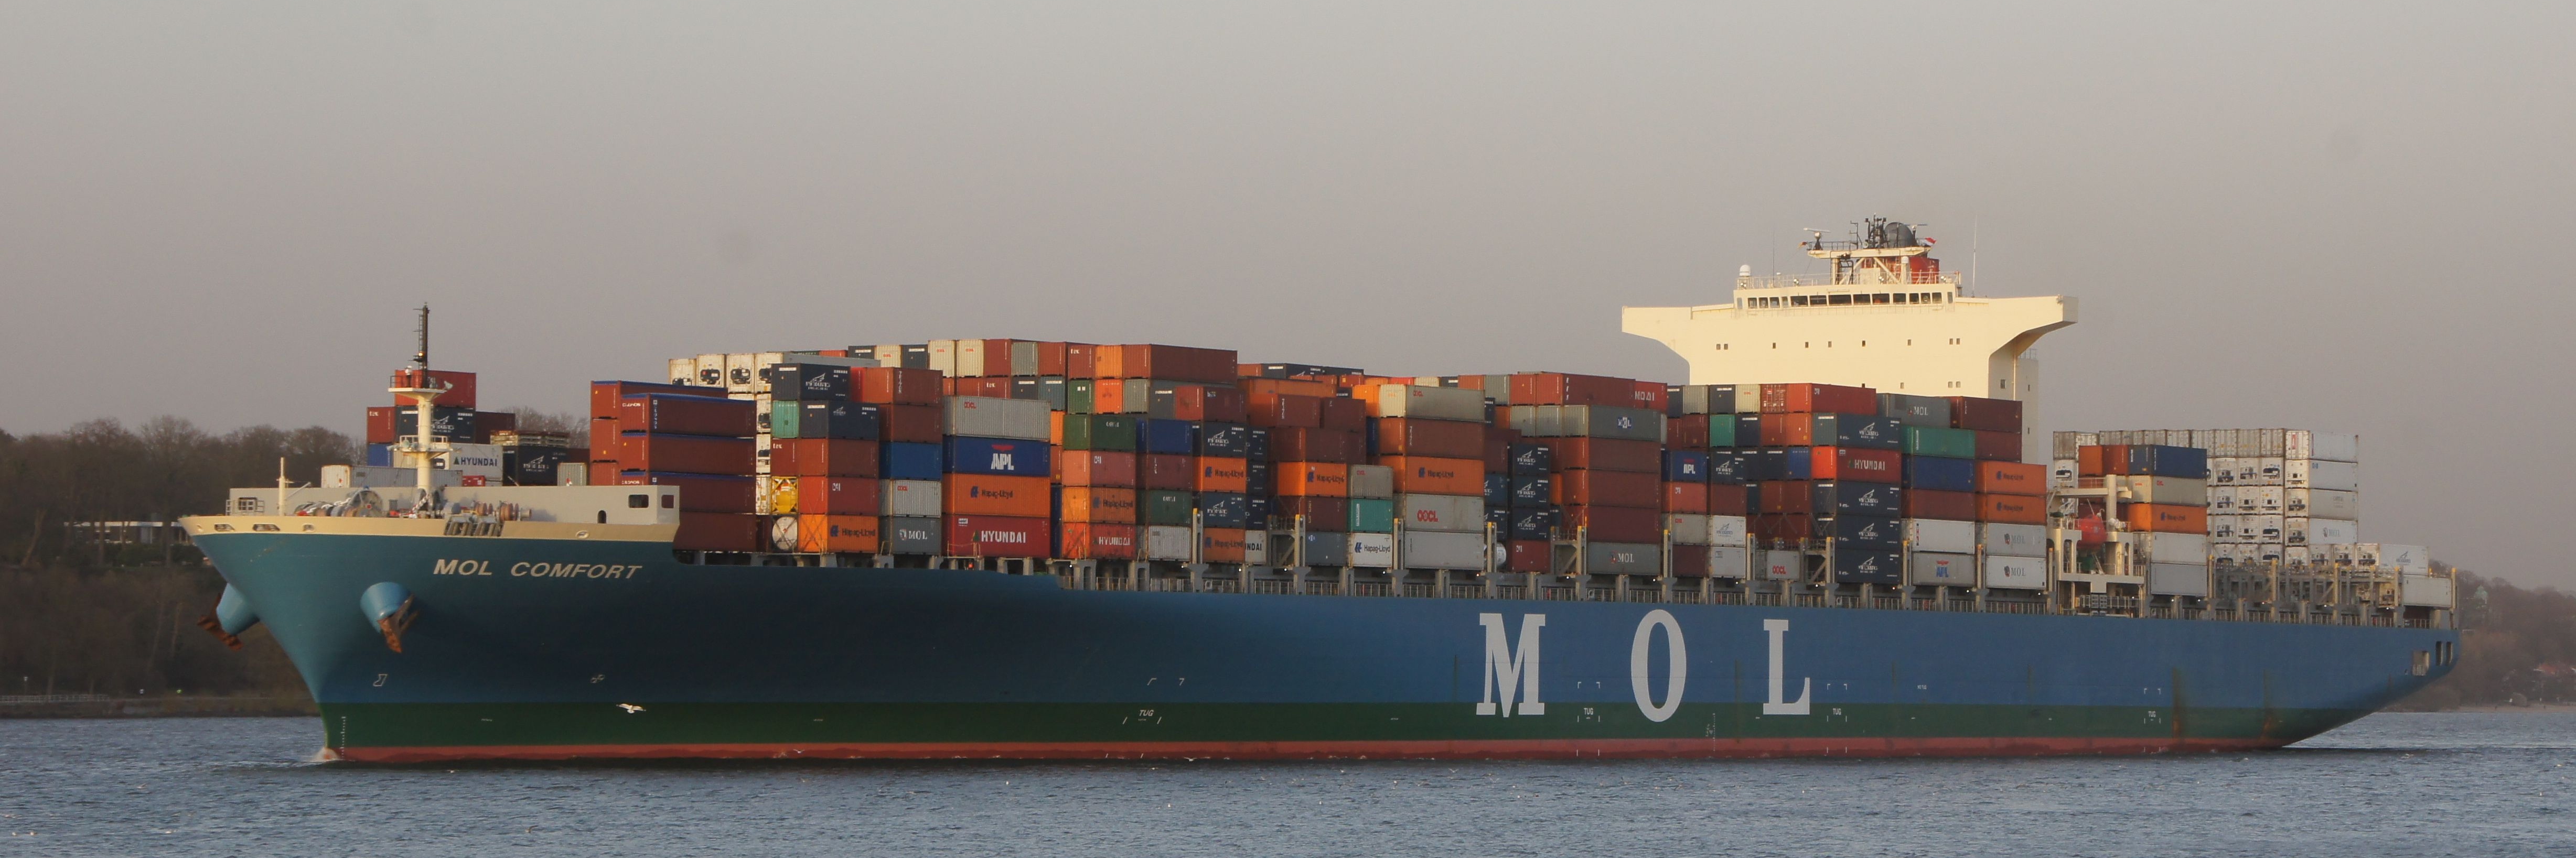 Marine container safety: Preventing storm-related catastrophes